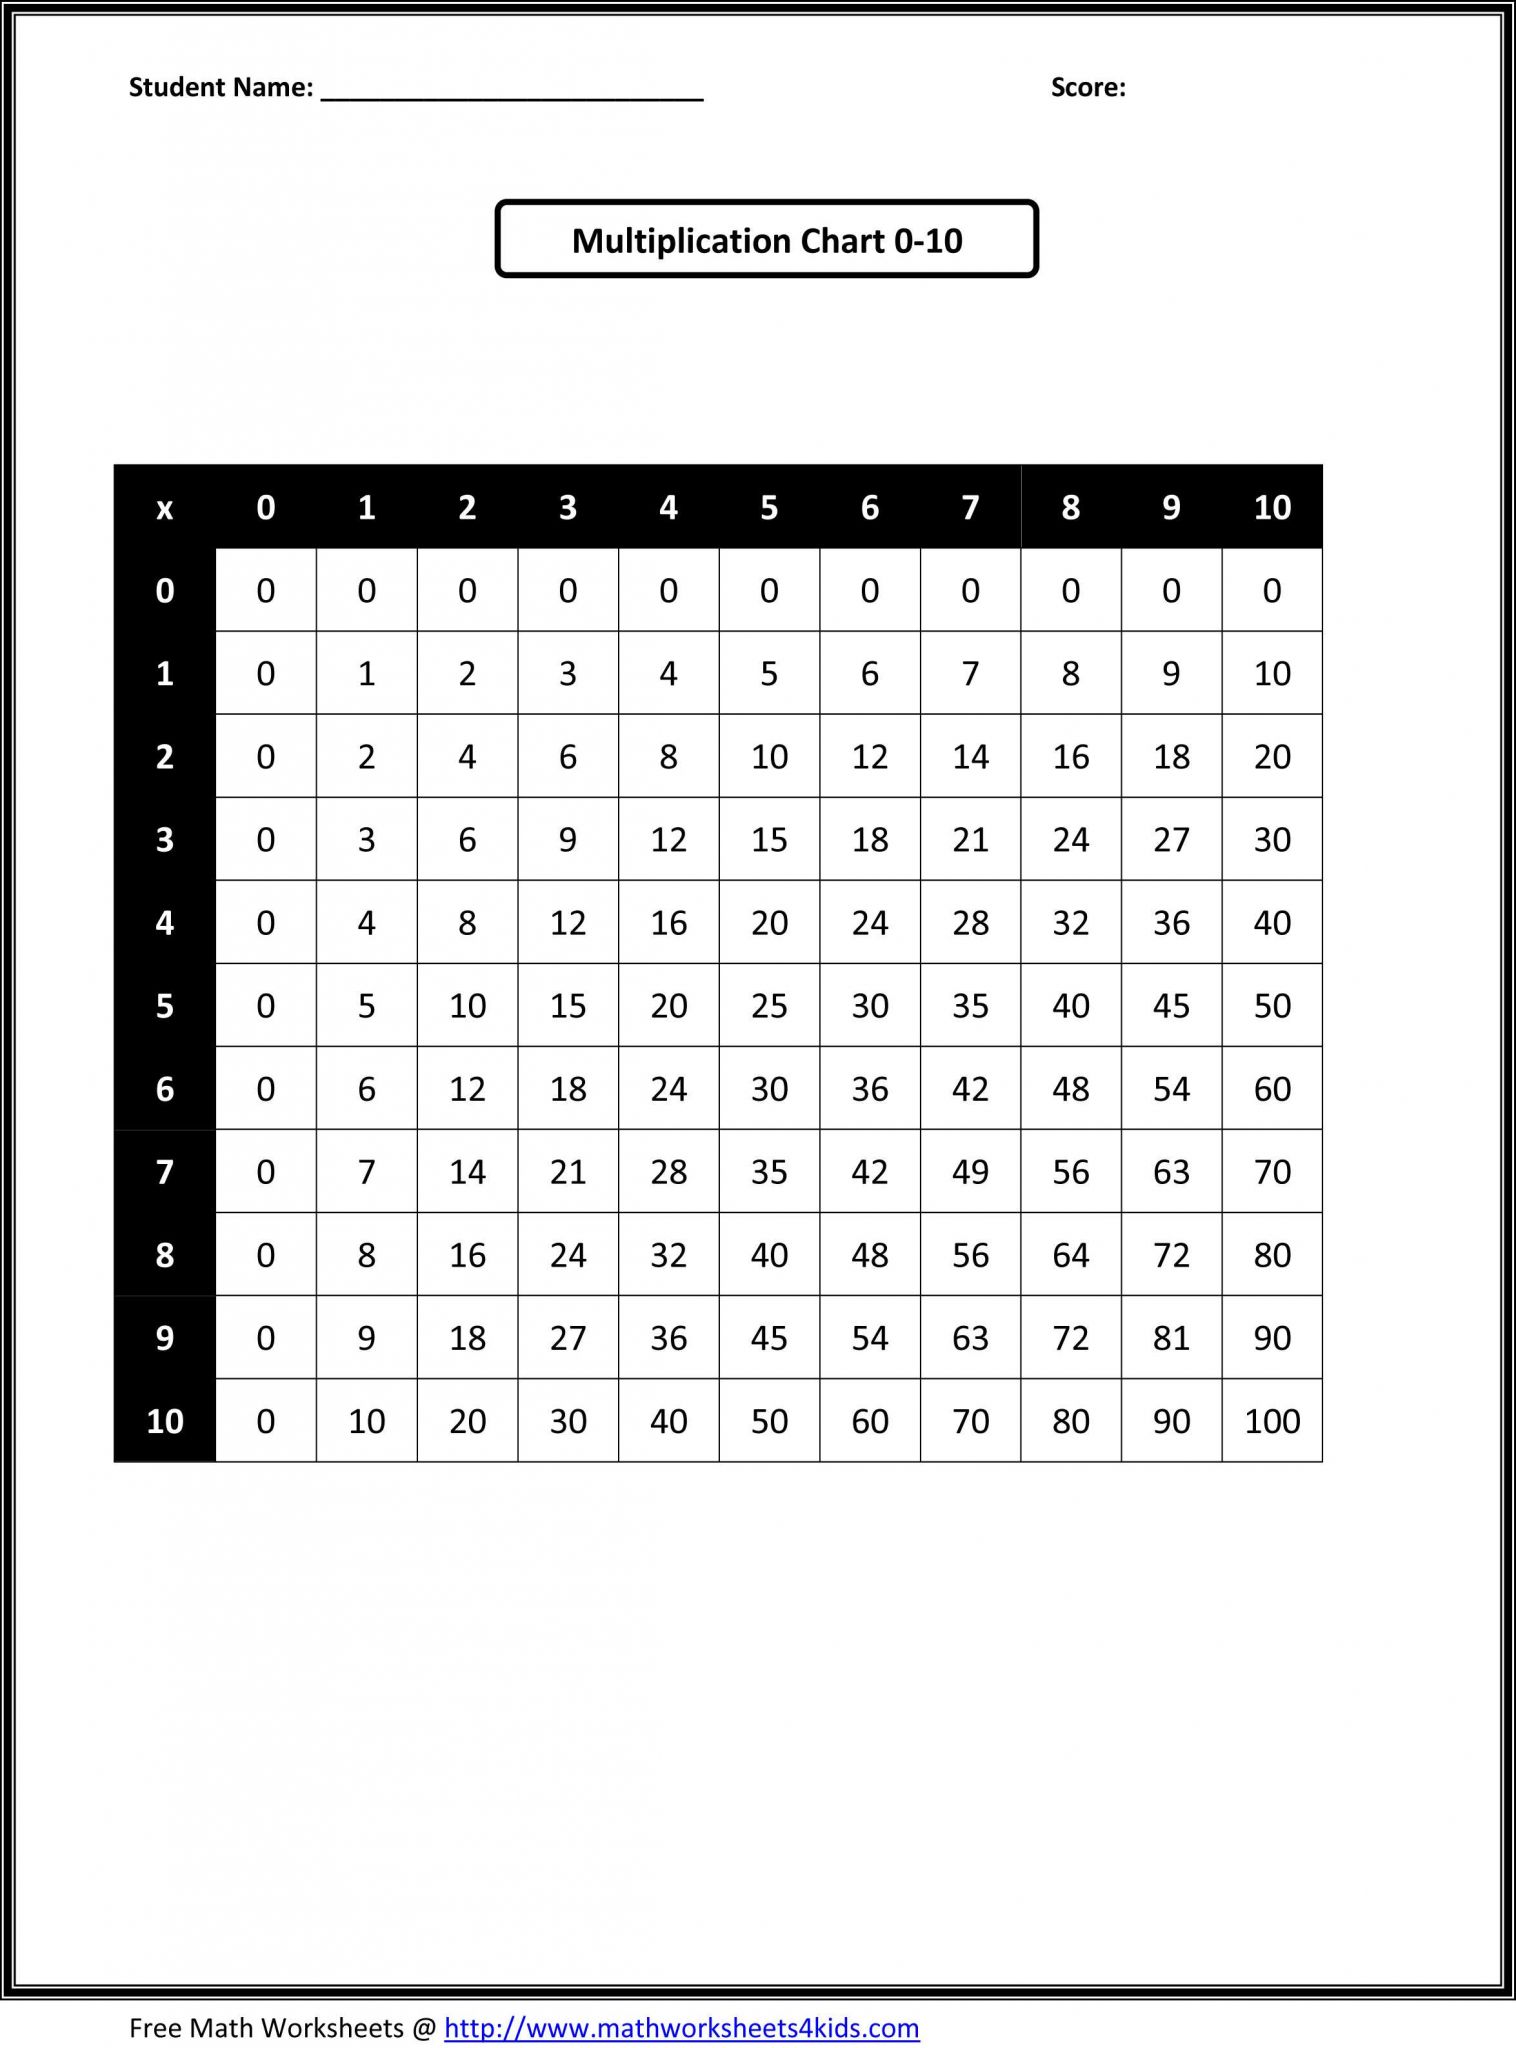 Solving Multiplication and Division Equations Worksheets and 3rd Grade Math Equations Worksheets